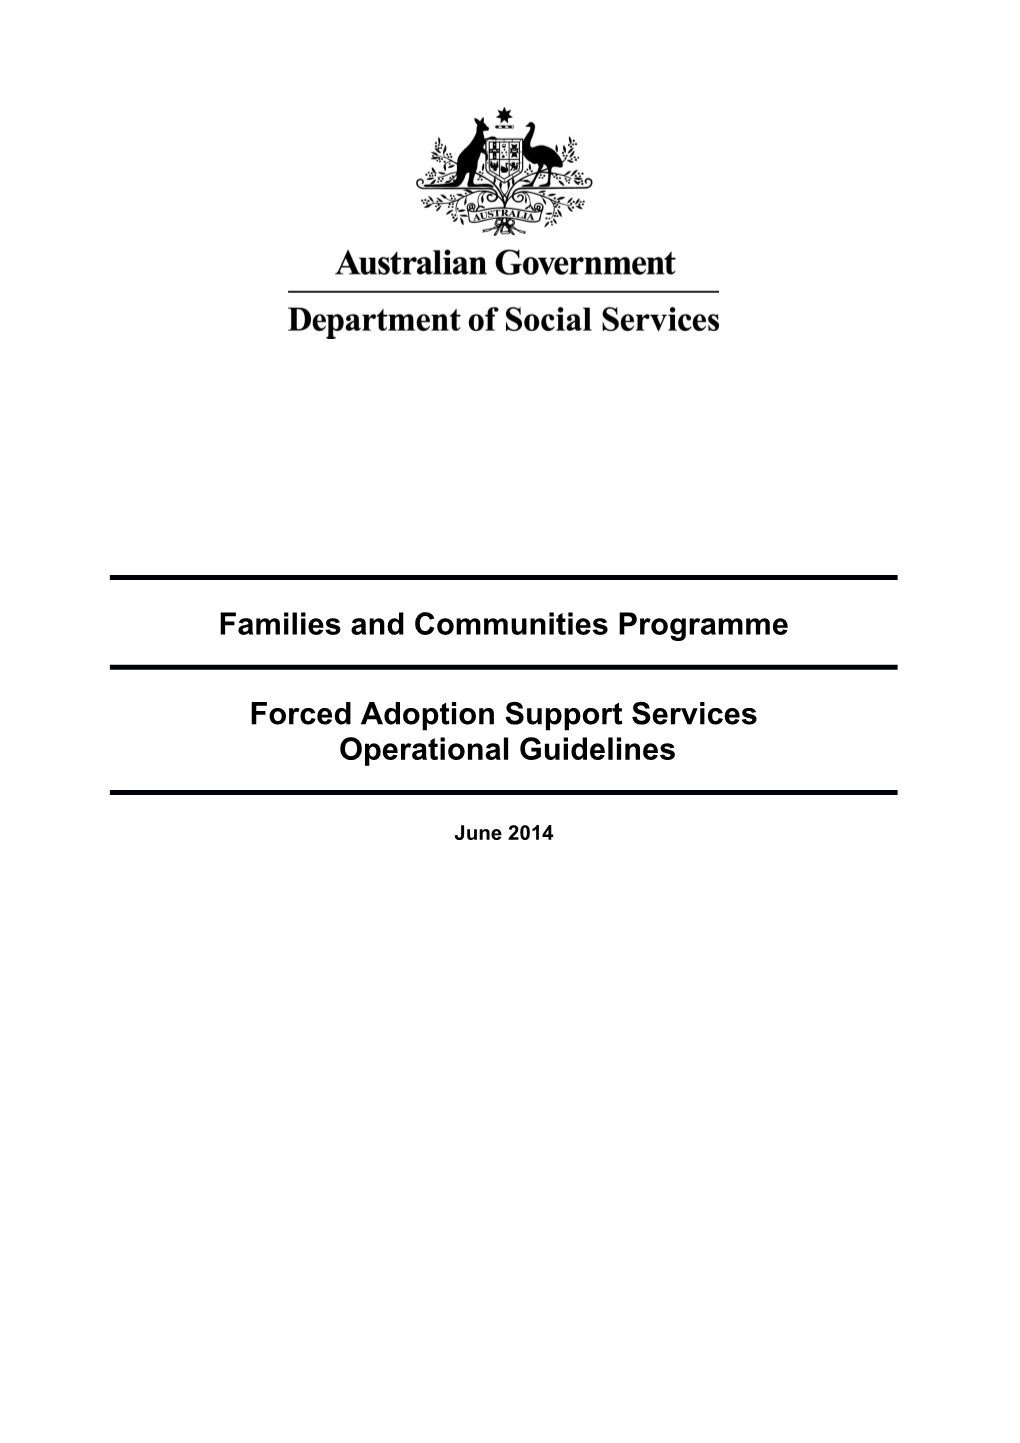 Forced Adoptions - Operational Guidelines